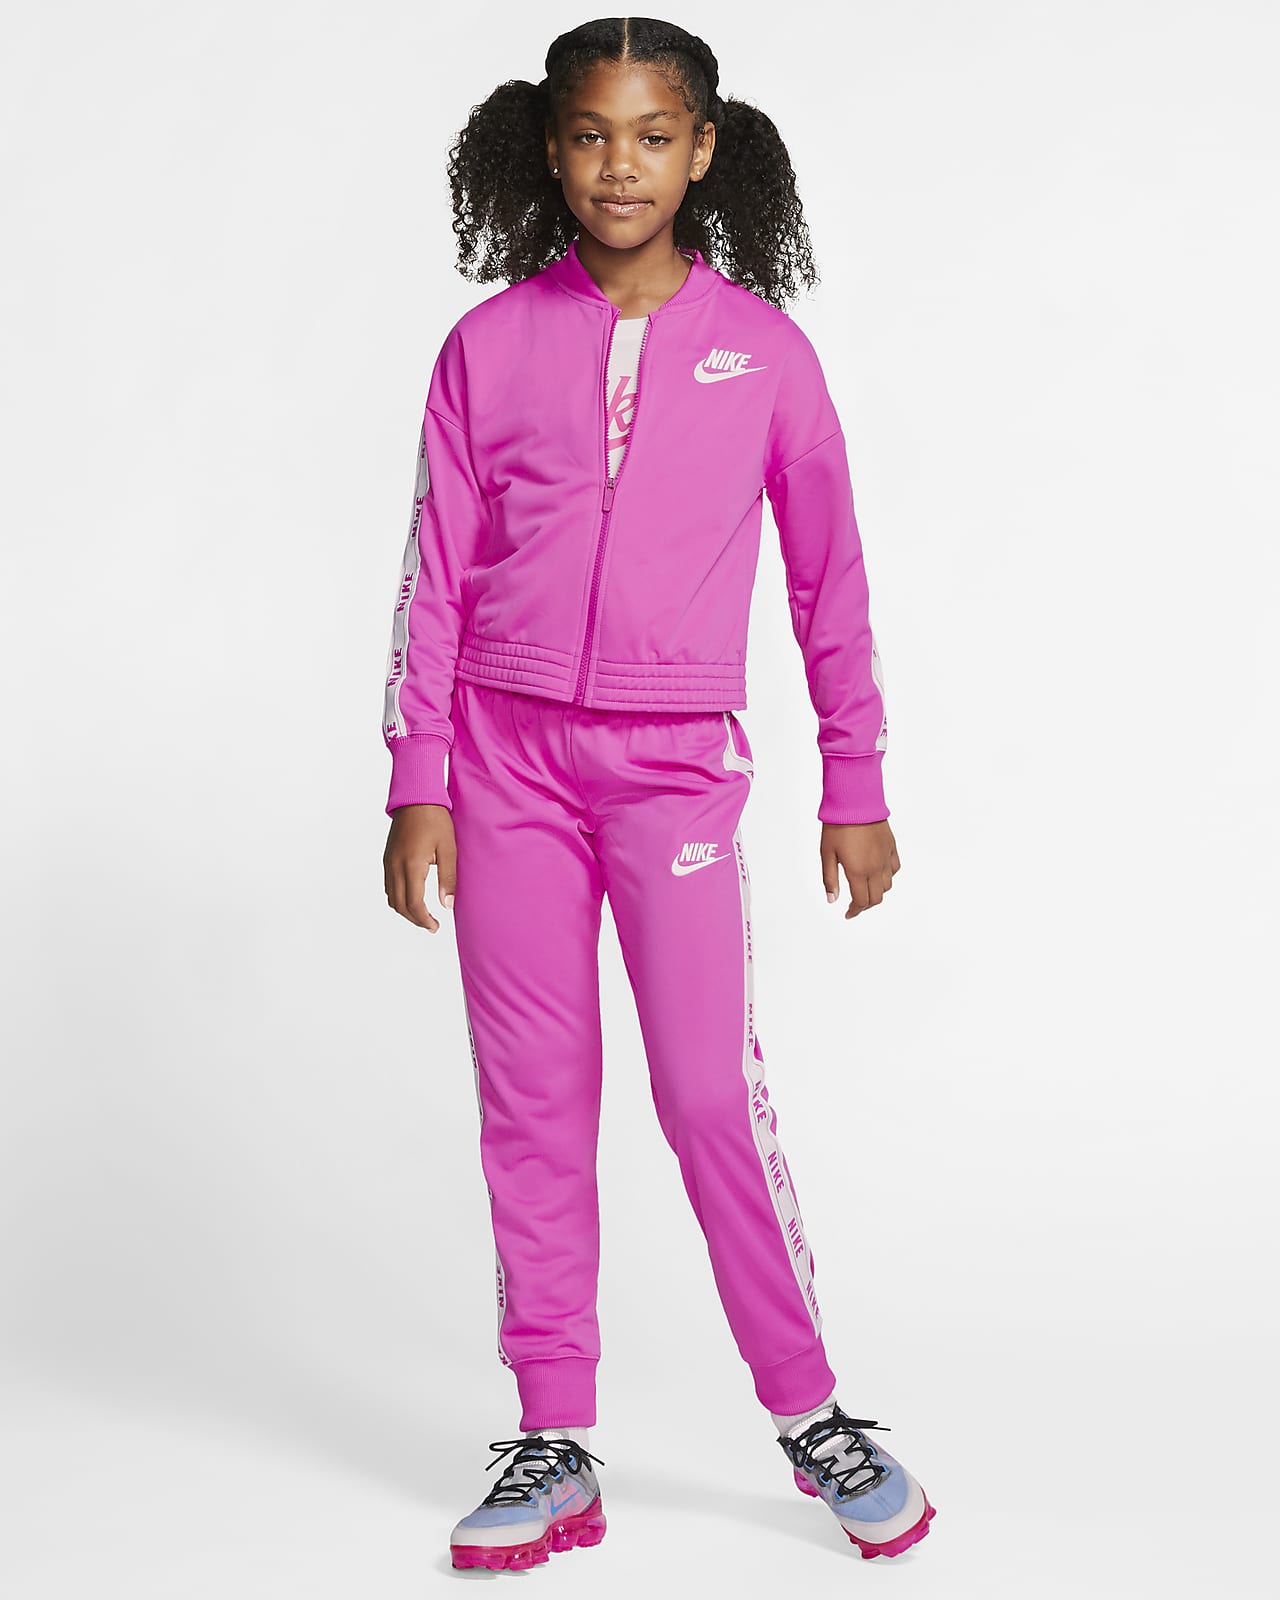 girls tracksuit age 3